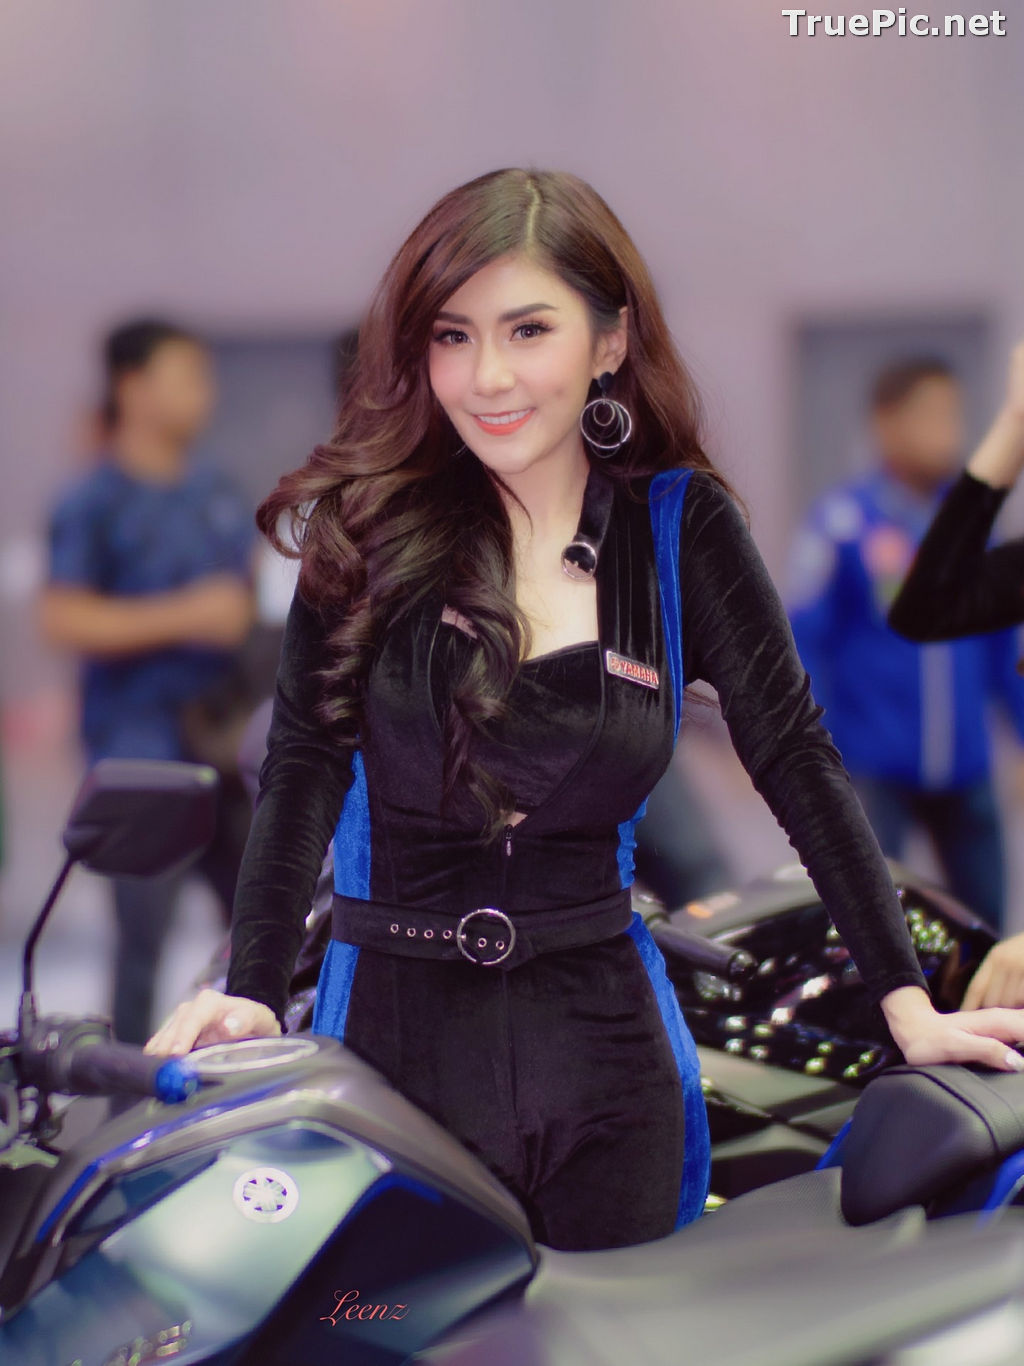 Image Thailand Racing Model - Thailand Showgirl Model Collection #3 - TruePic.net - Picture-109